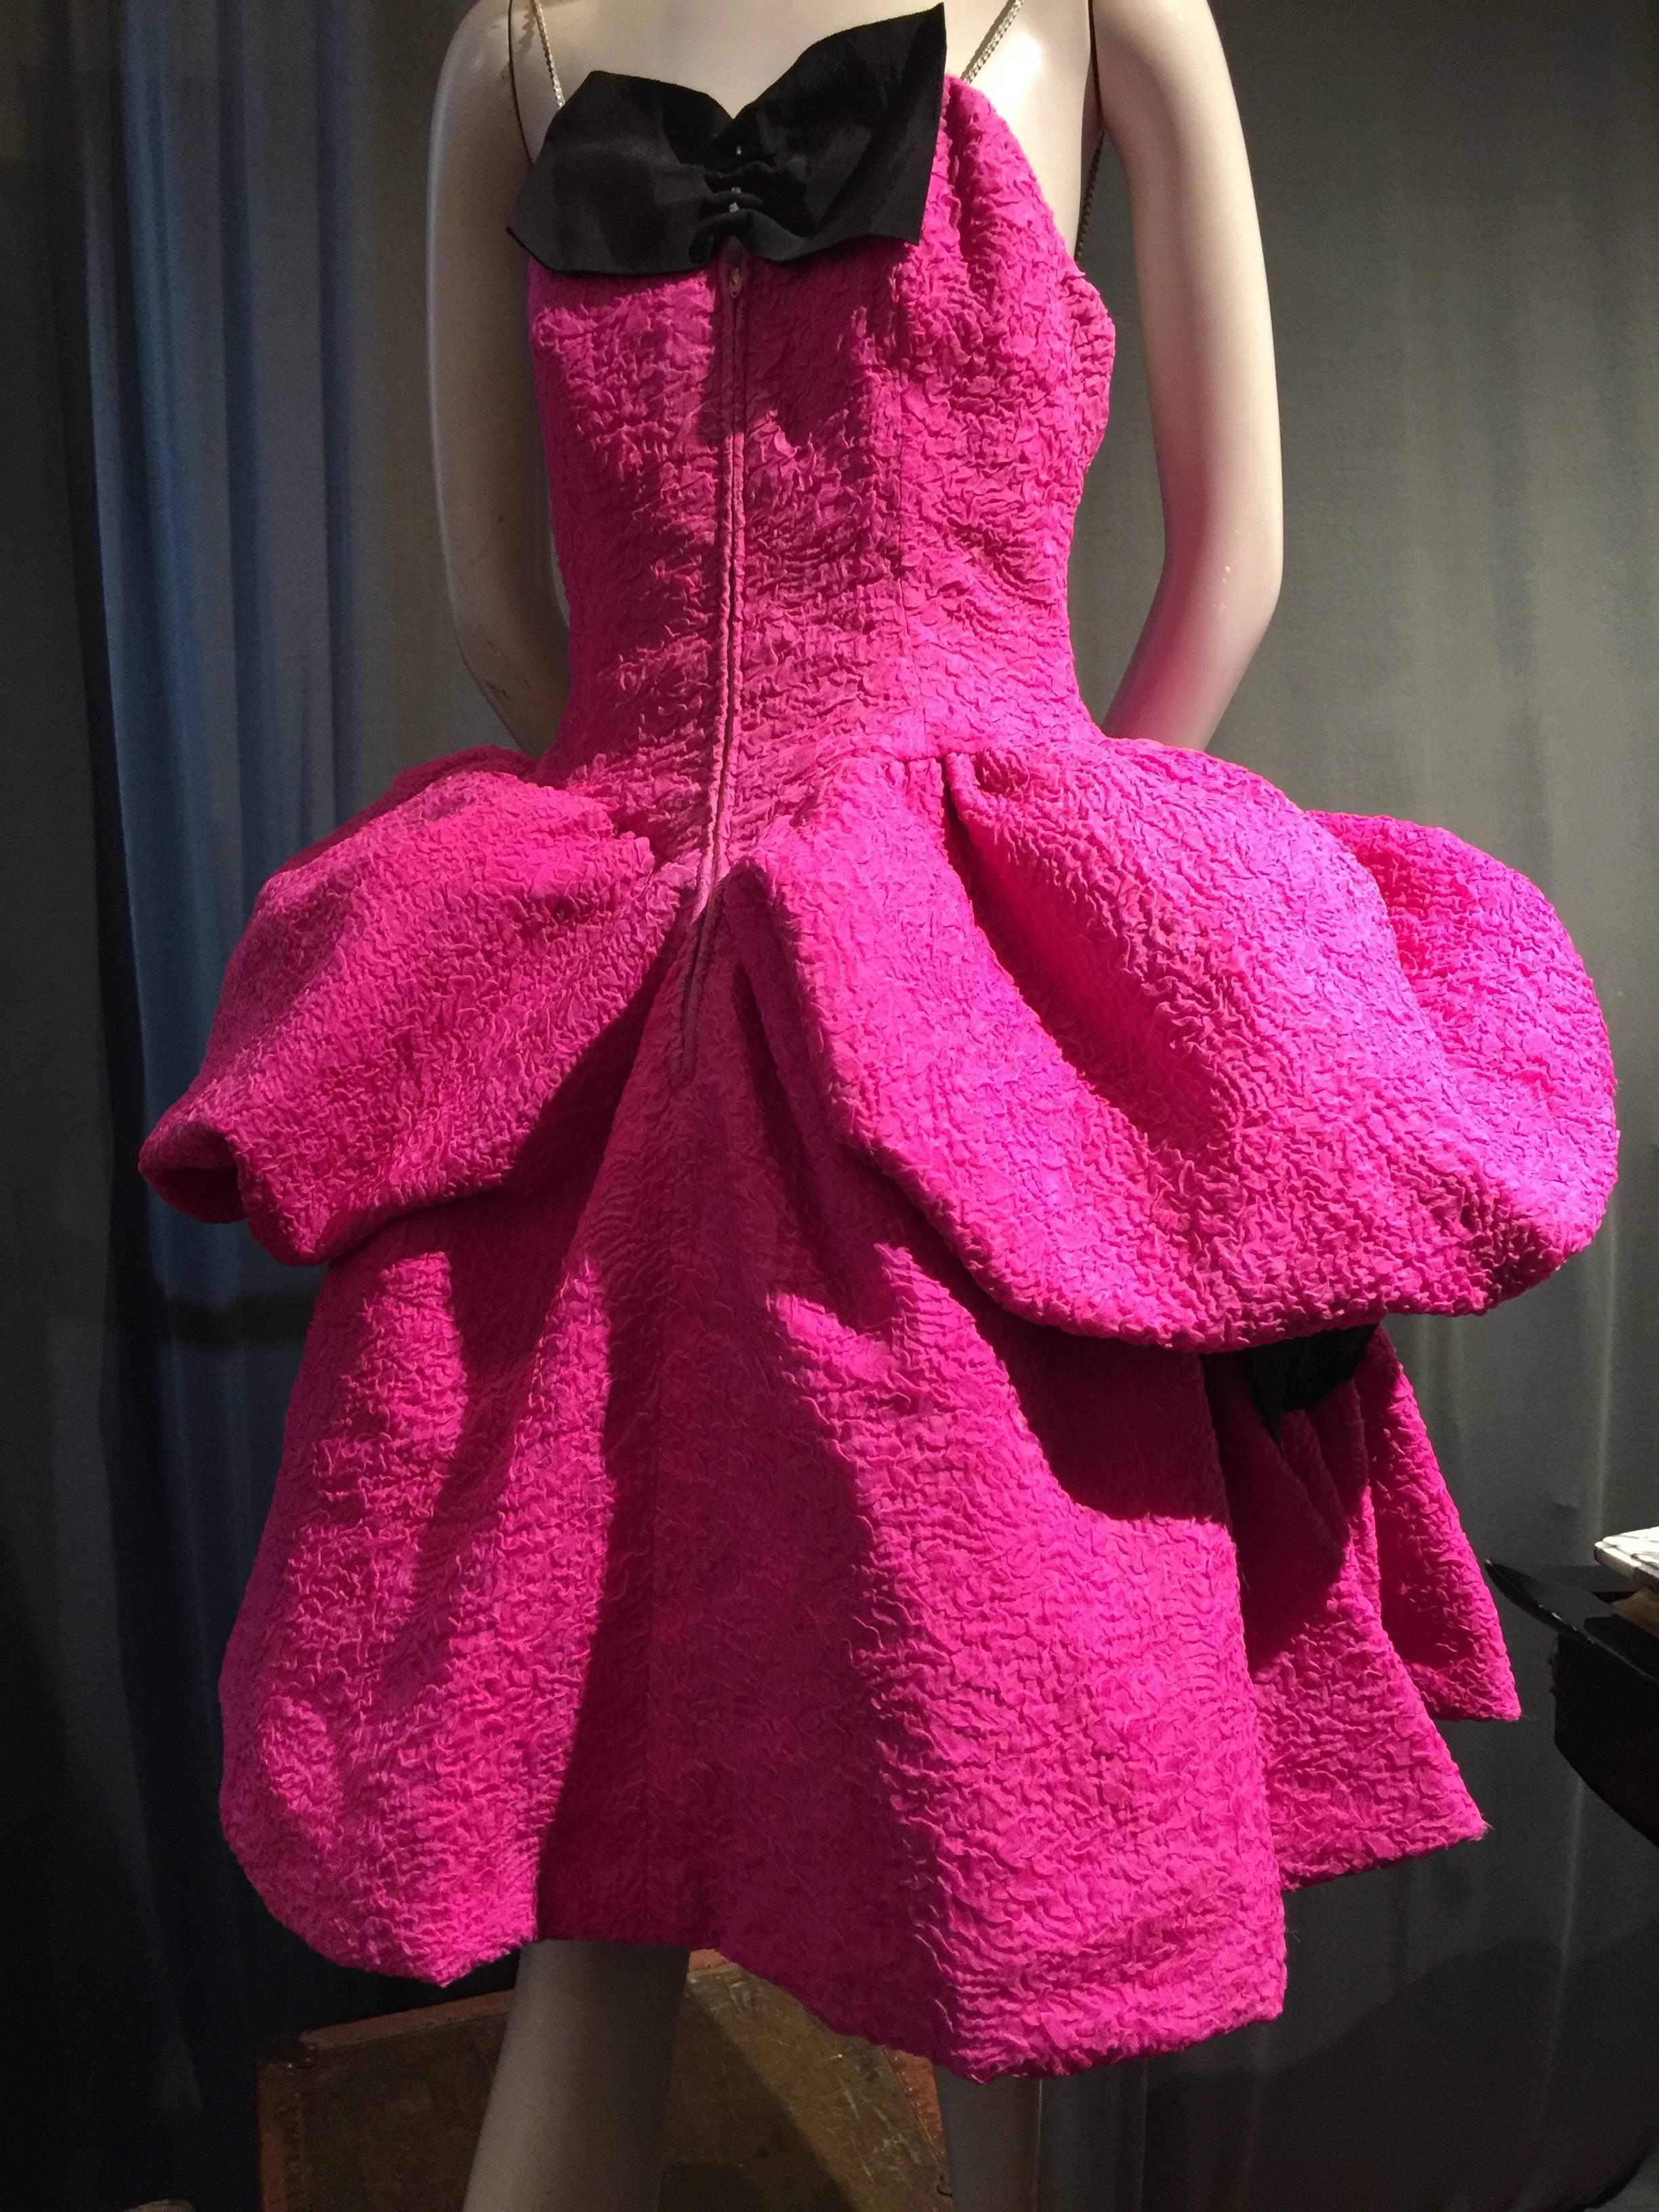 A fabulously sassy 1980s iconic Christian Lacroix design!  Hot pink textured silk spaghetti strap cocktail dress with full knee-length skirt, crinoline and horsehair underpinnings and two side poufs gathered into velvet ribbon bows. Front center